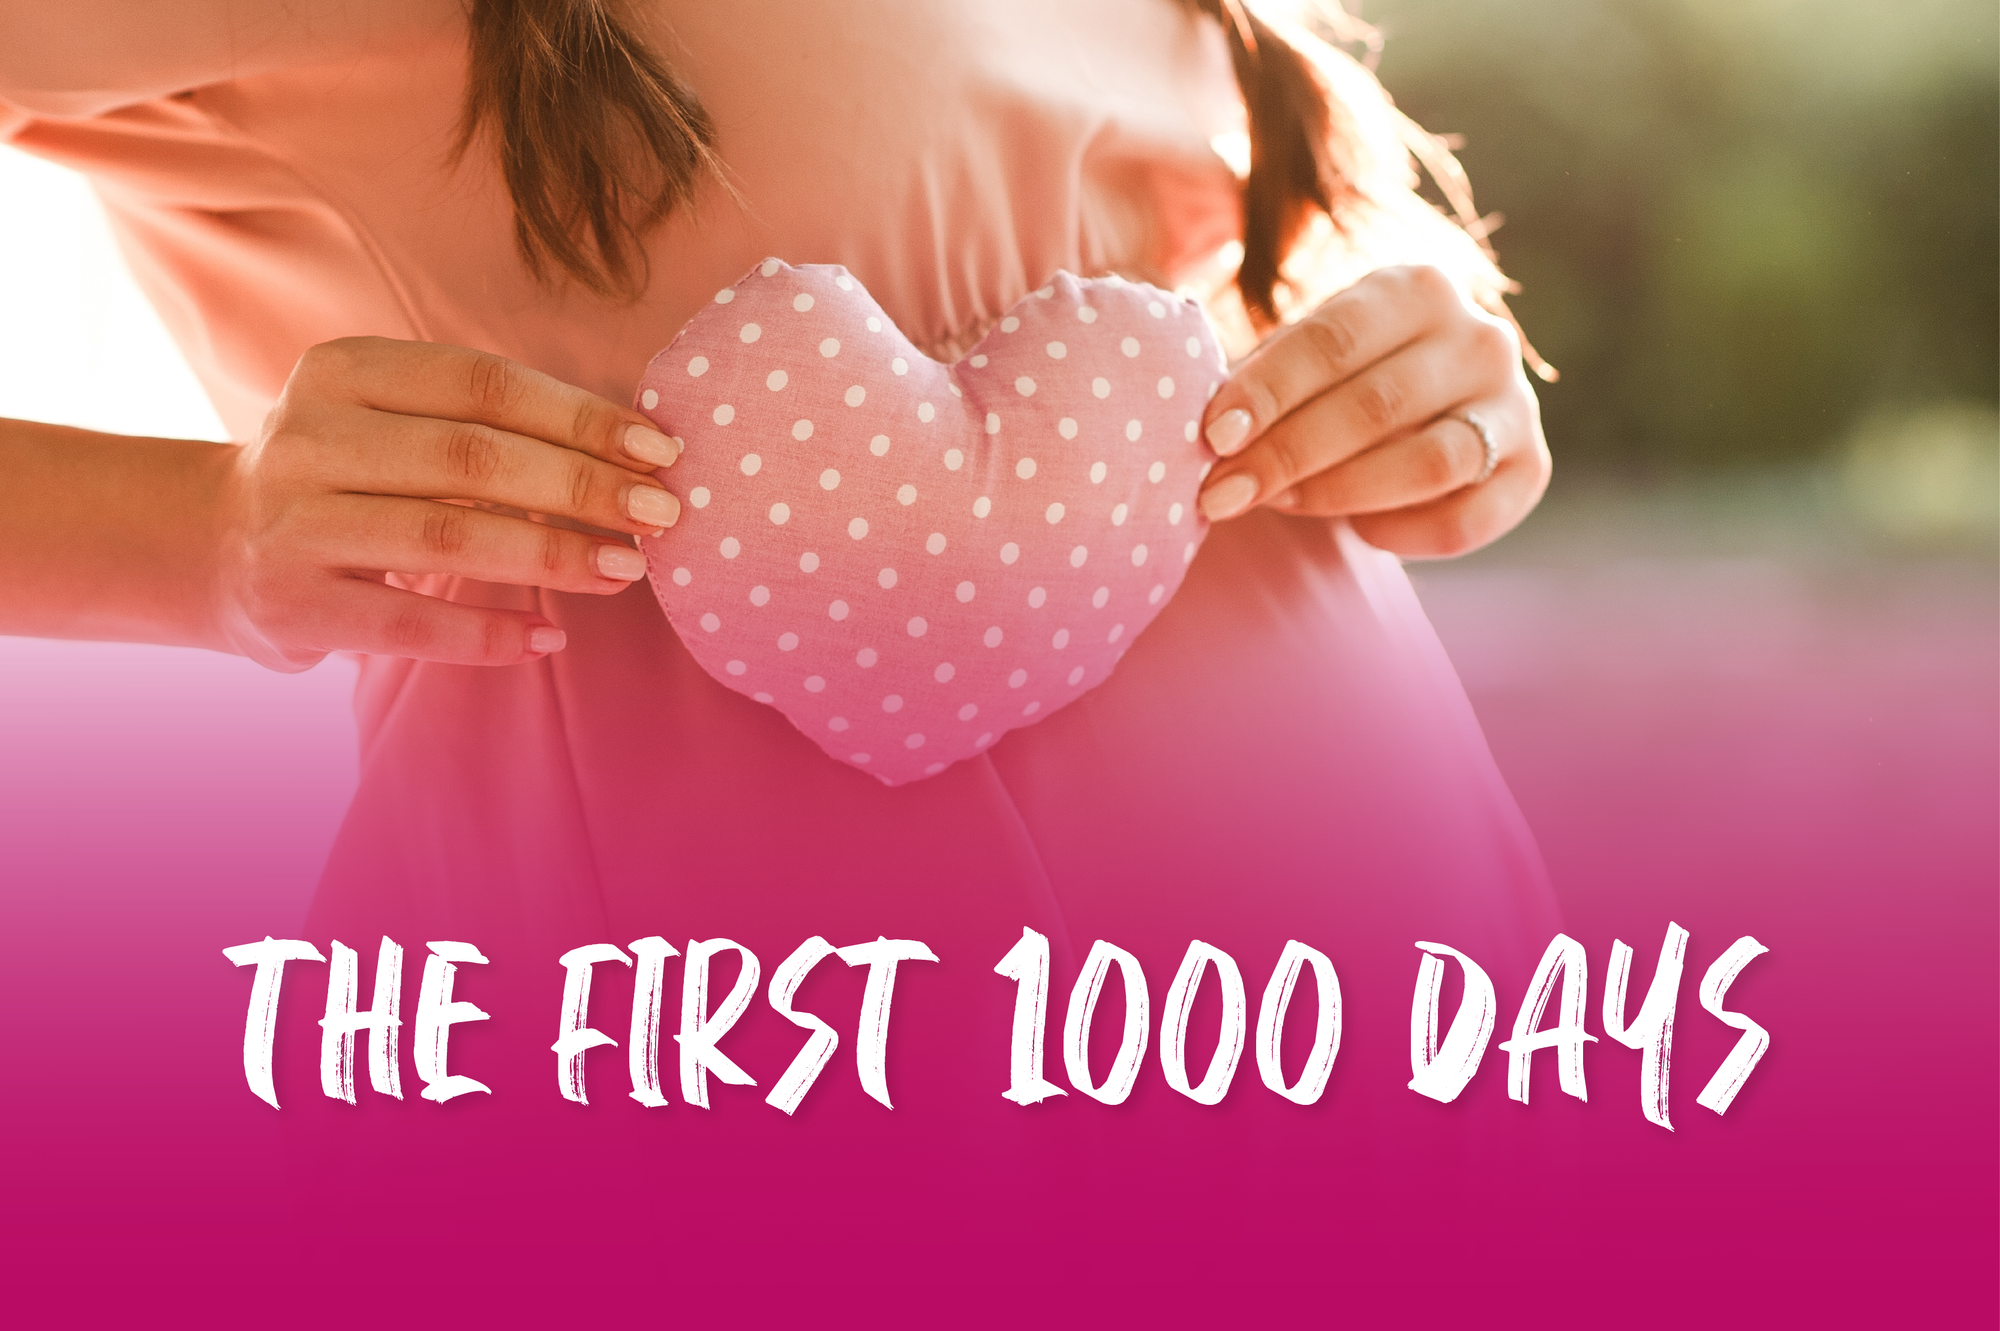 The first 1000 days